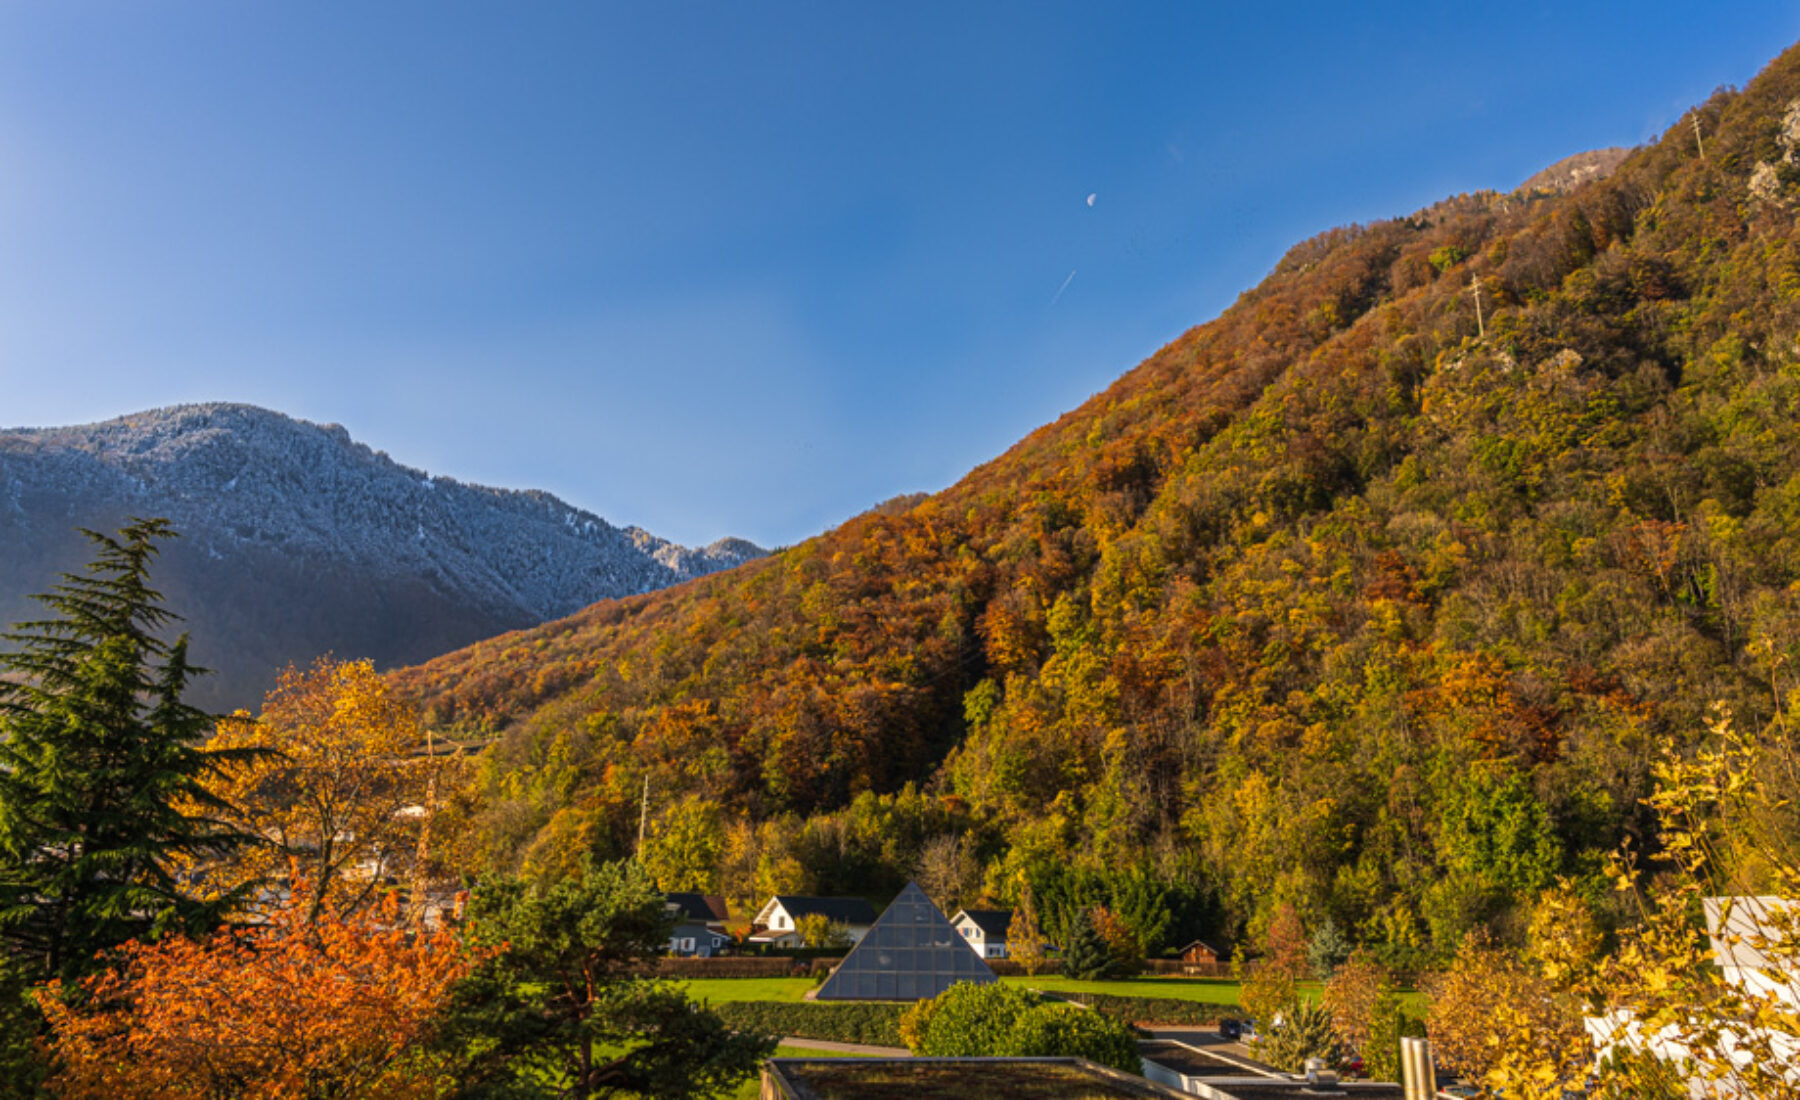 2019-11-19 Last autumn colours and first snow on nearby mountains